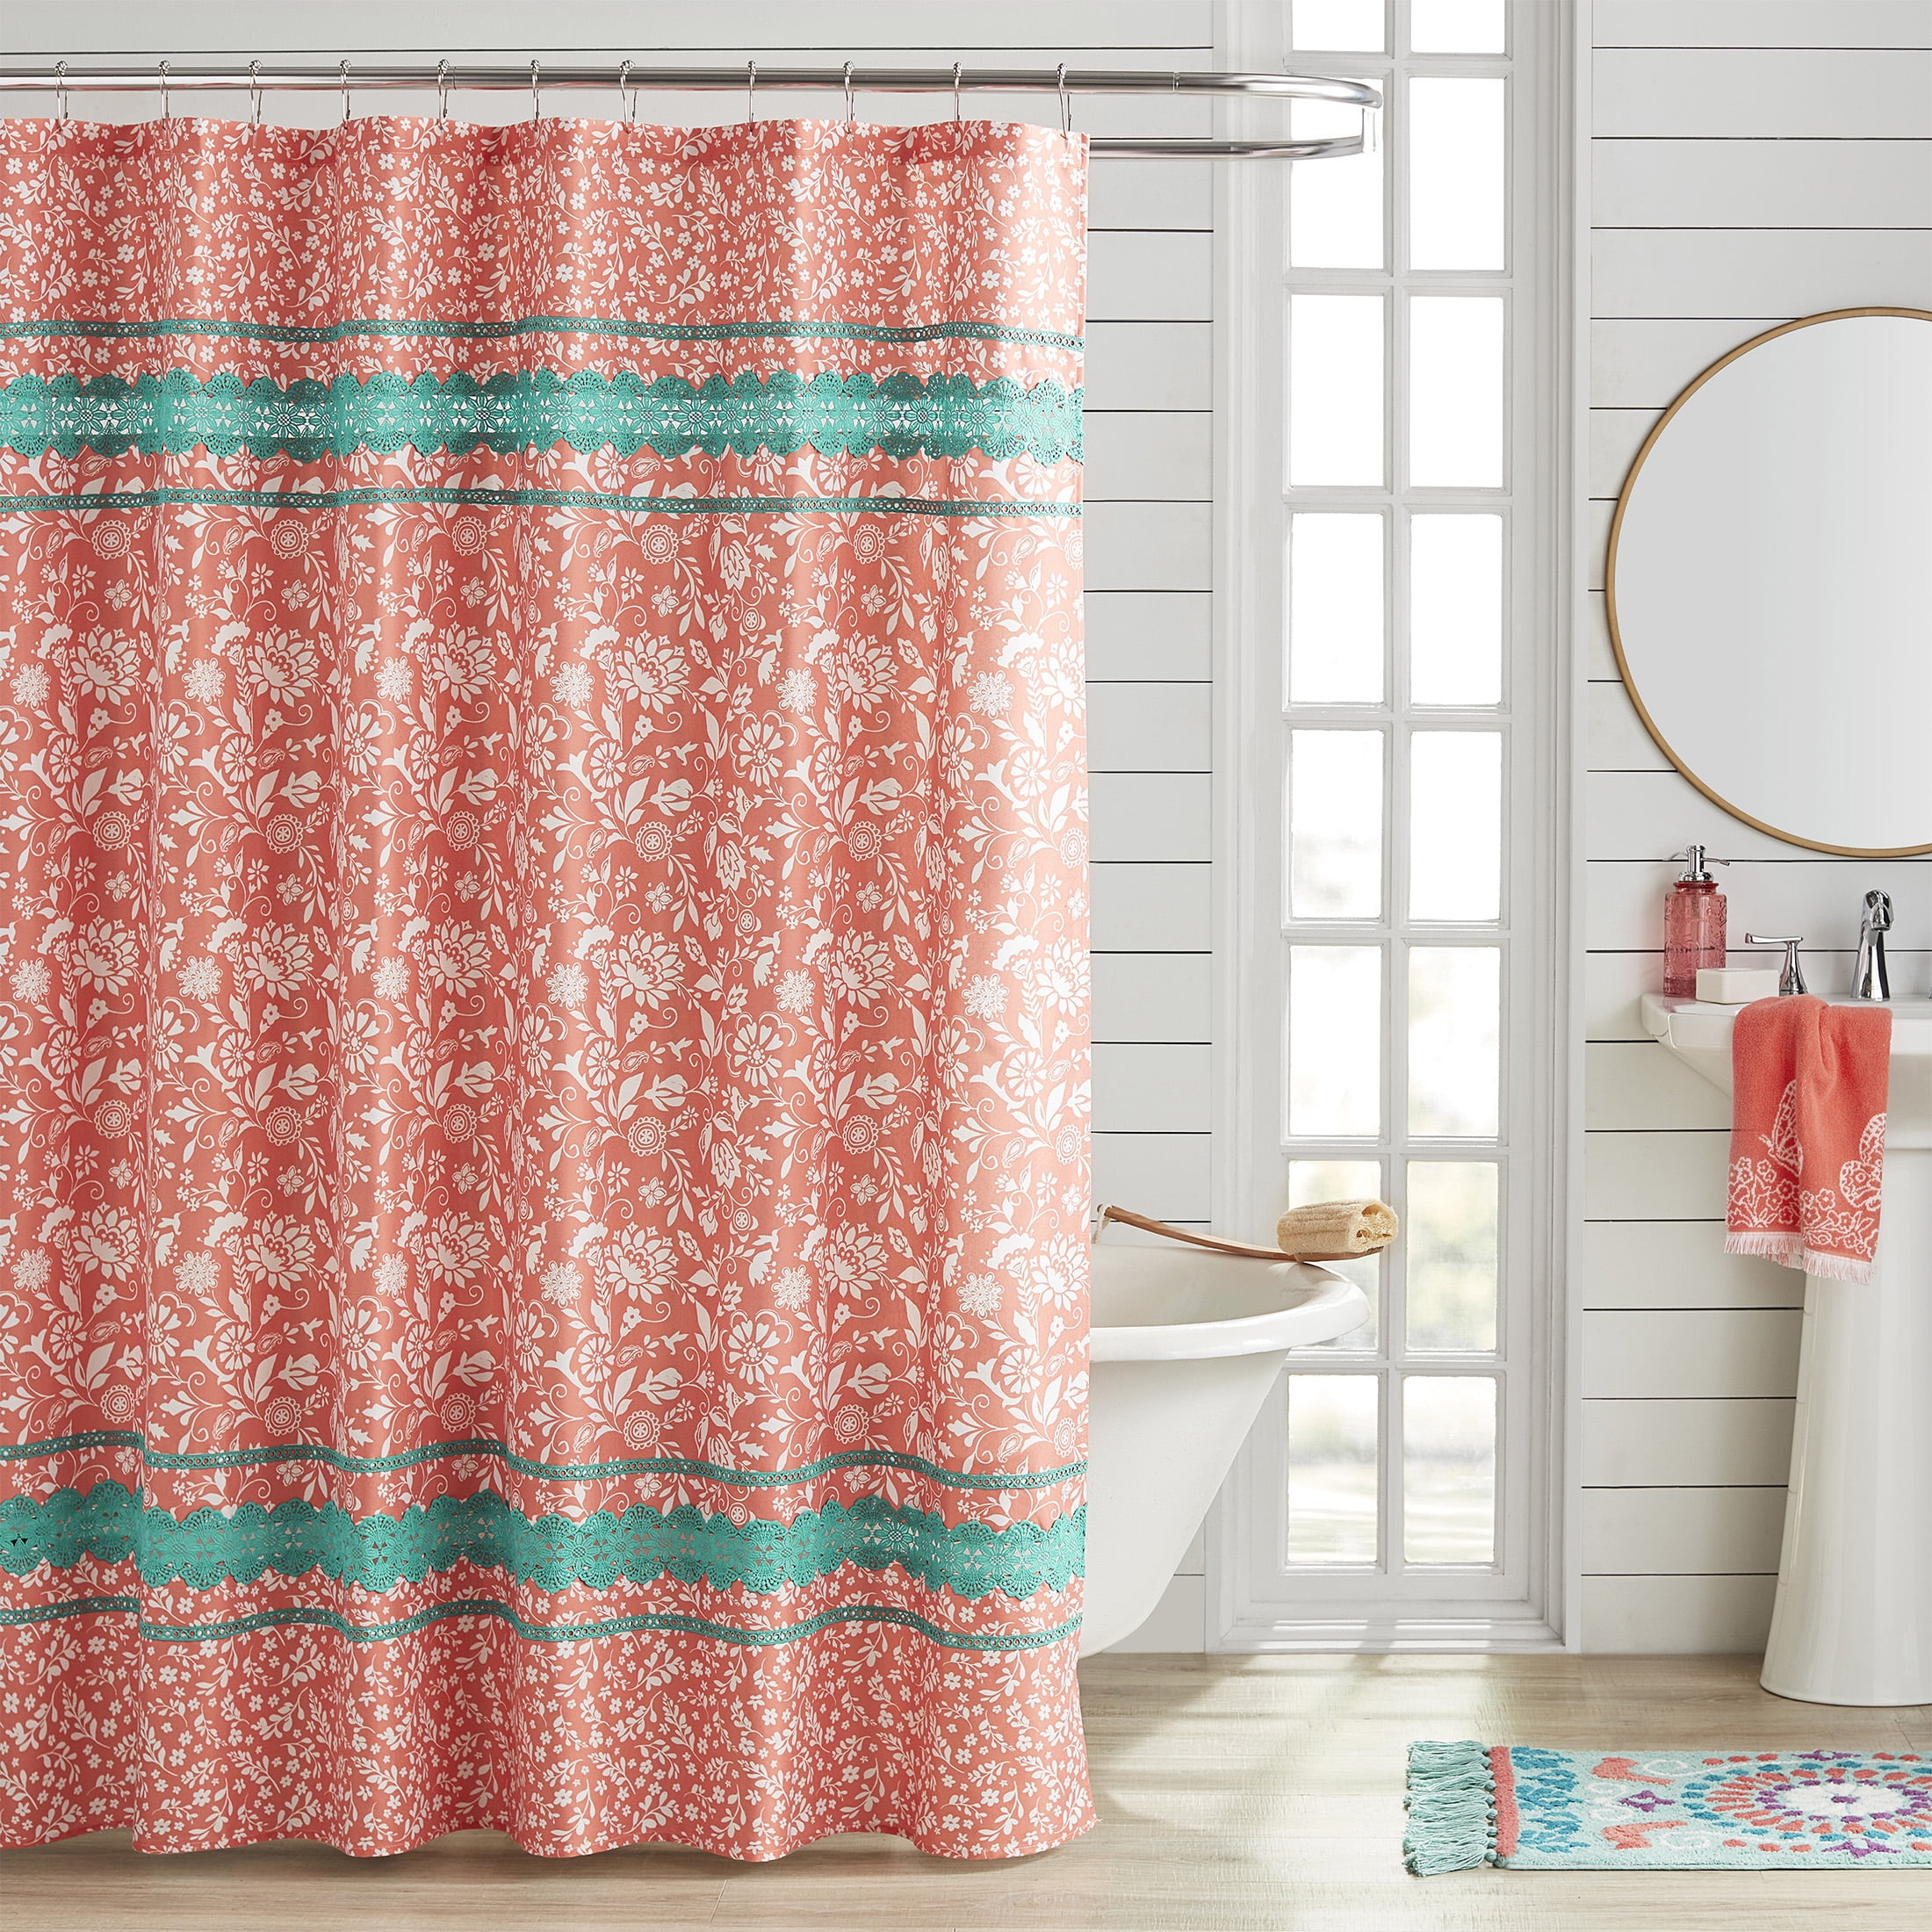 BOHO POLYESTER SHOWER CURTAIN WHITE/CORAL/TAUPE W MATCHING PLASTIC HOOKS NICE!! 